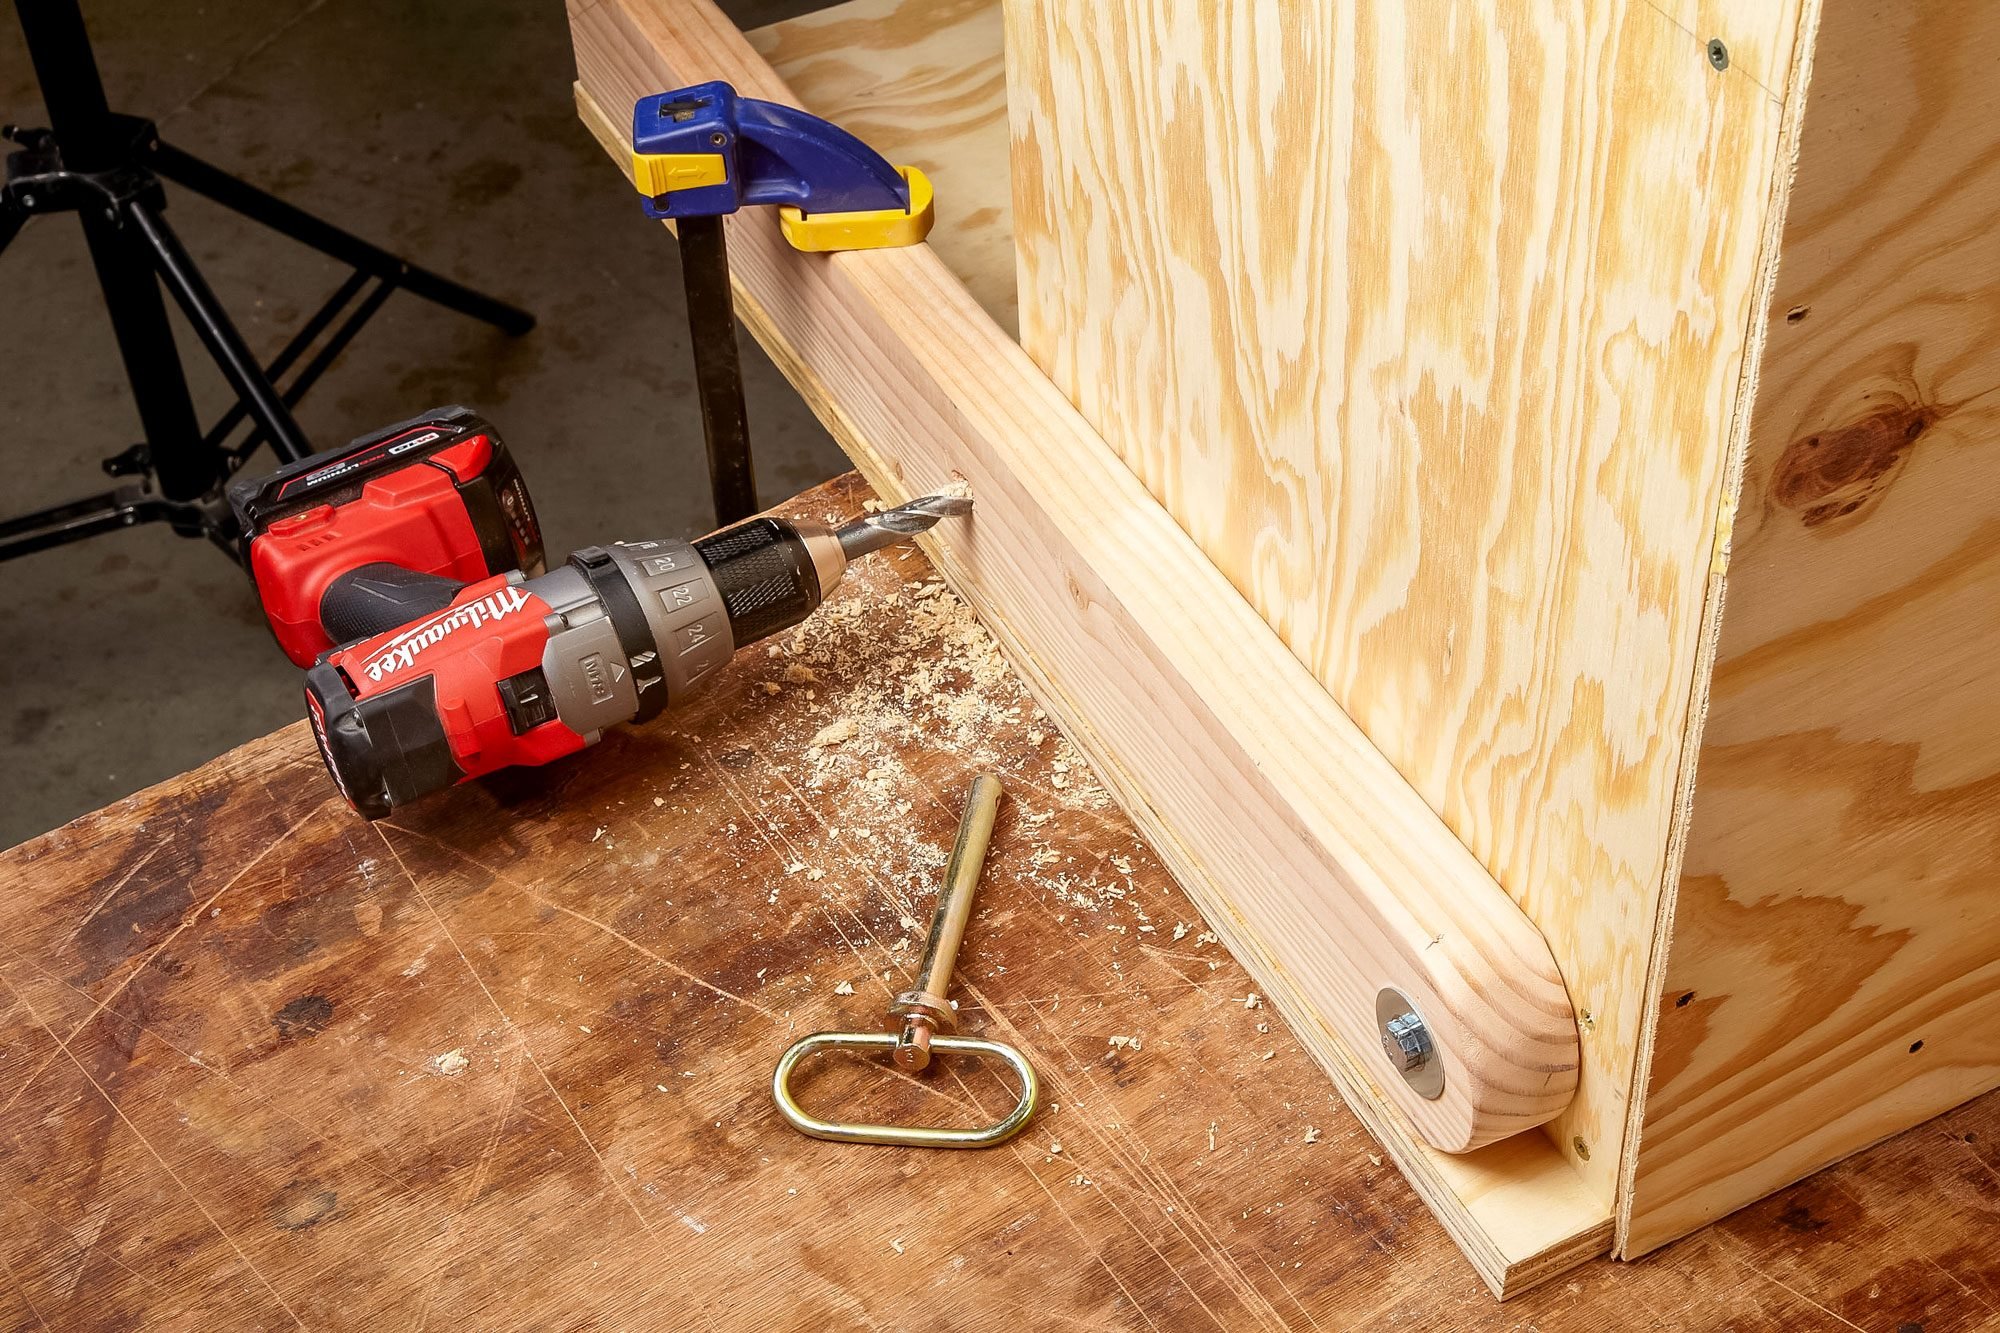 Drilling Hole into Wood with Drill